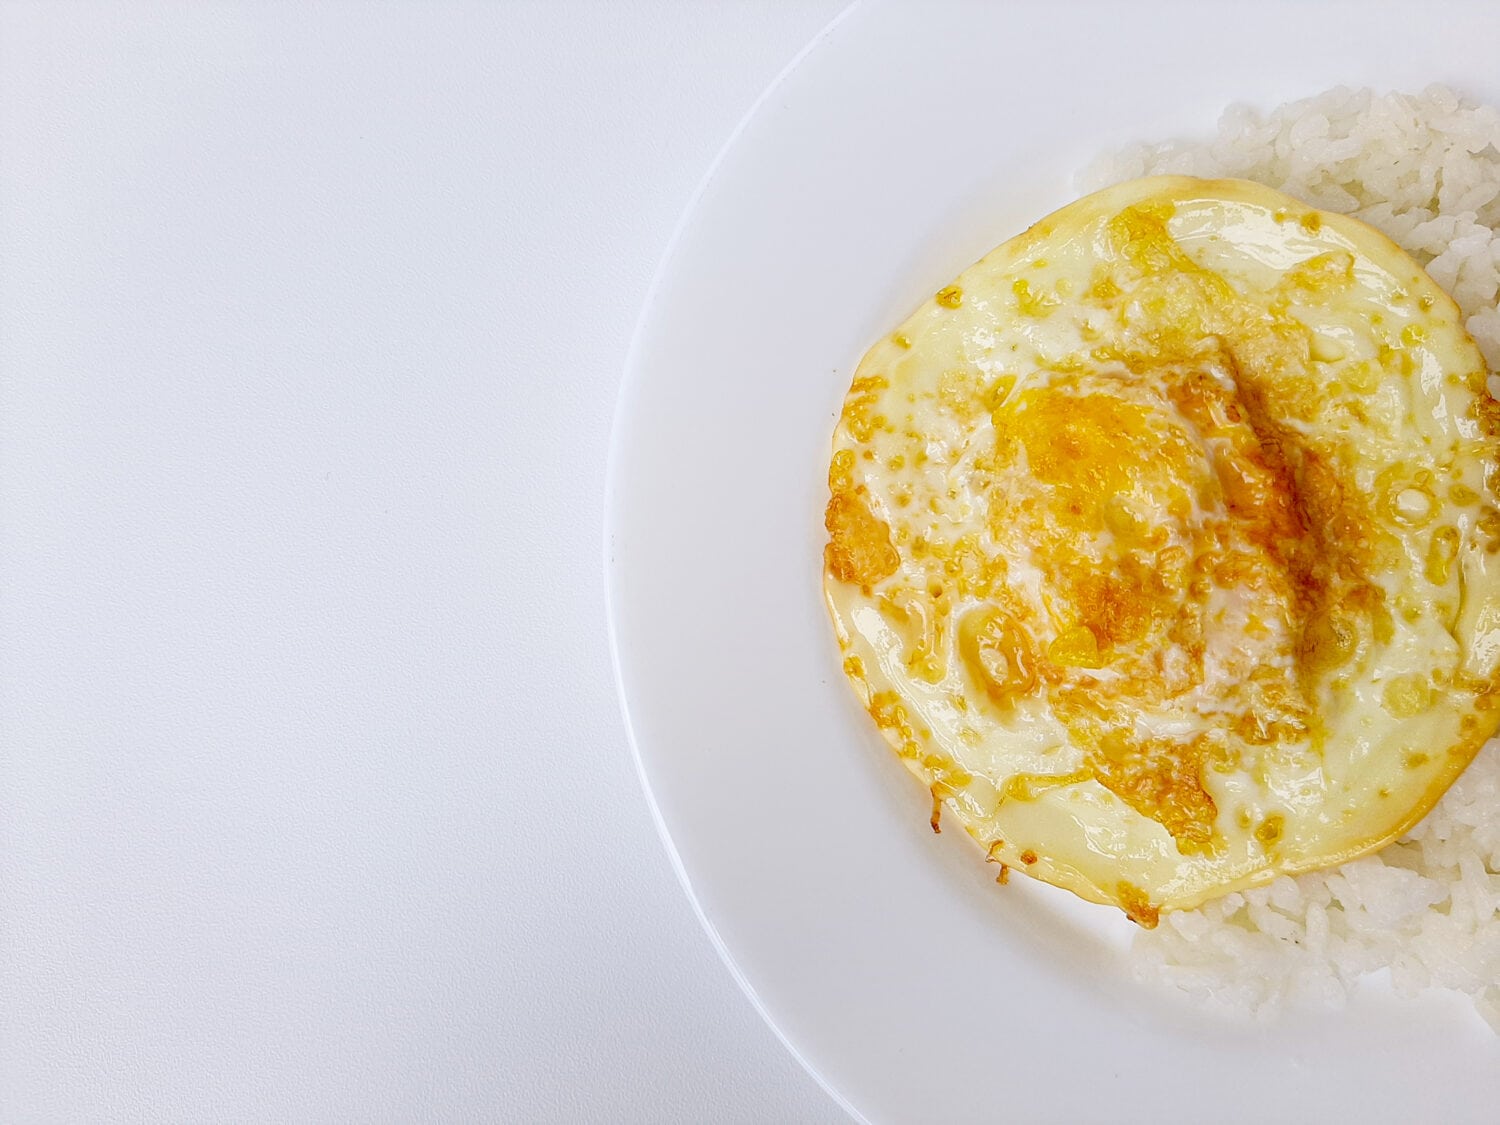 Fried egg or overcooked sunny side up, served with white rice, on a white plate, isolated in white background. Space for text. Flat lay or overhead